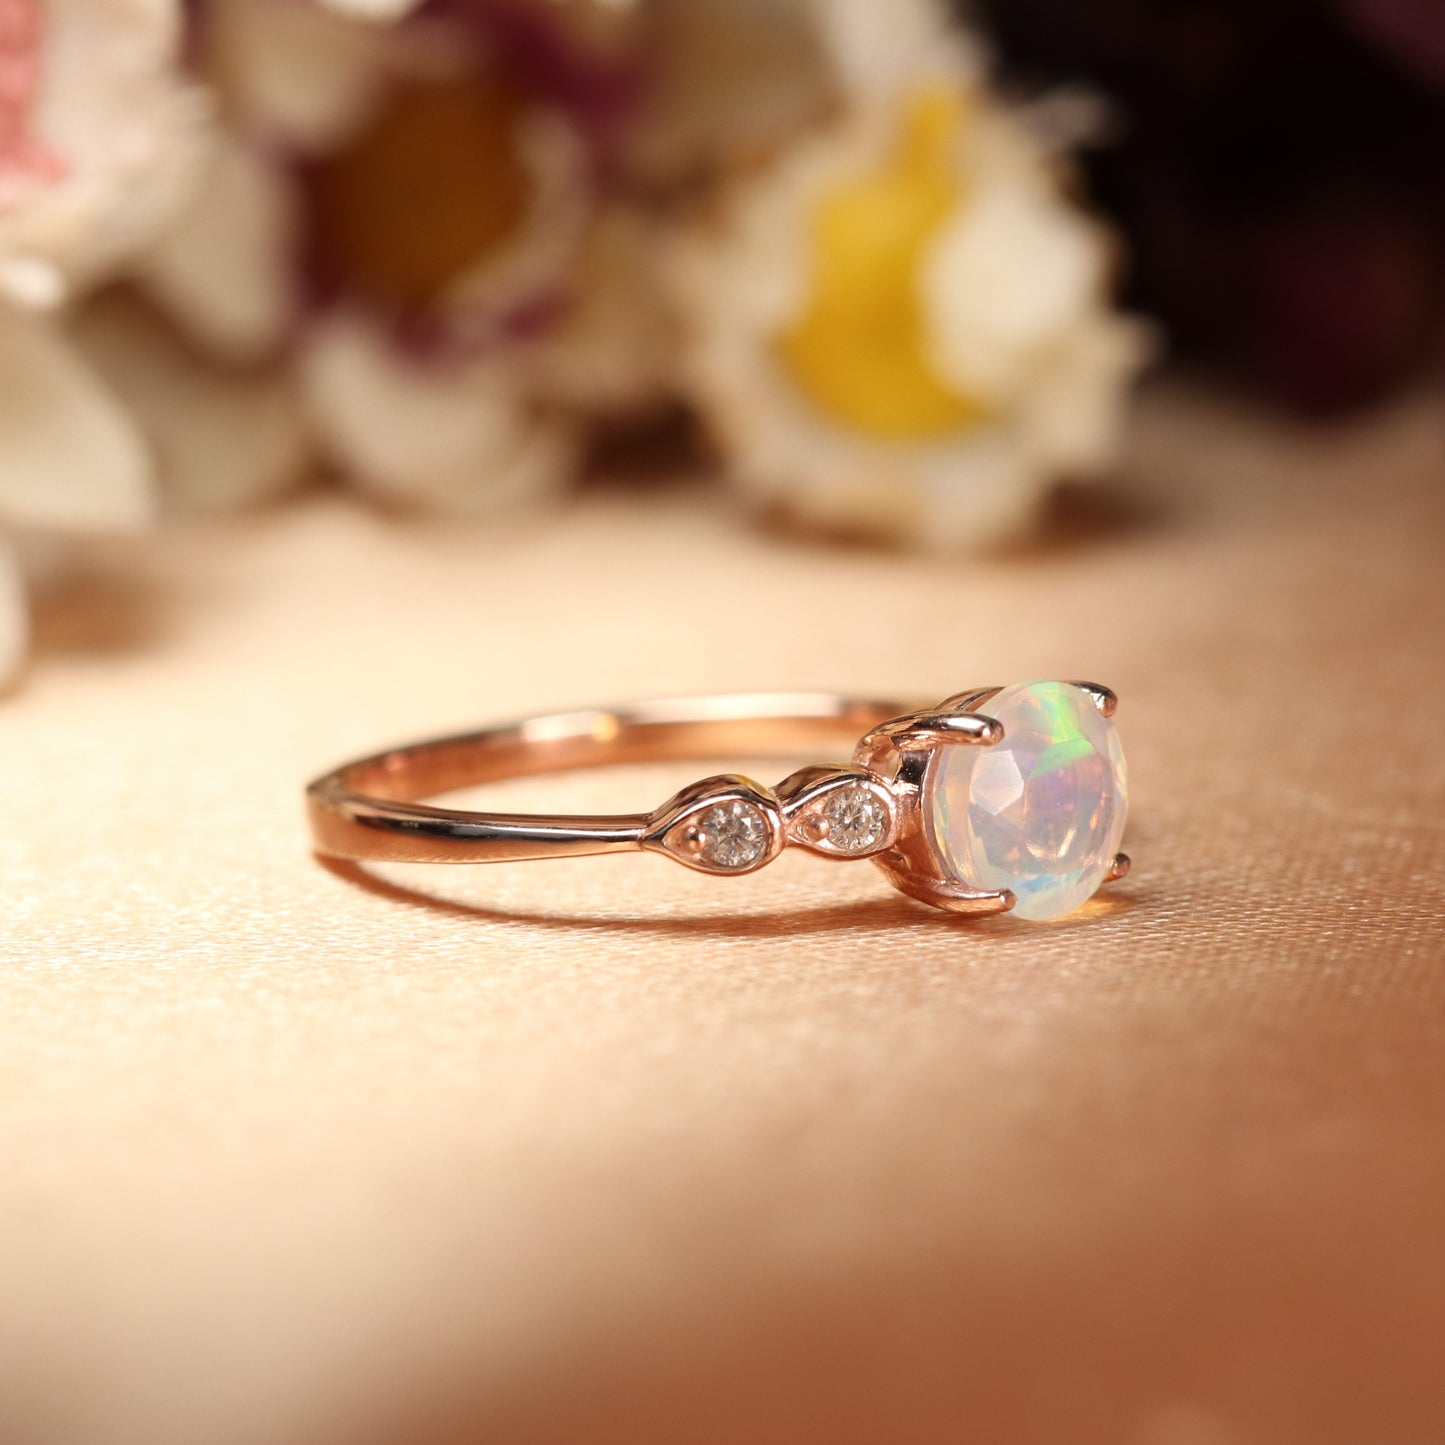 1 Carat 5 Stone Opal with diamond Engagement Wedding Ring for Women in Rose Gold